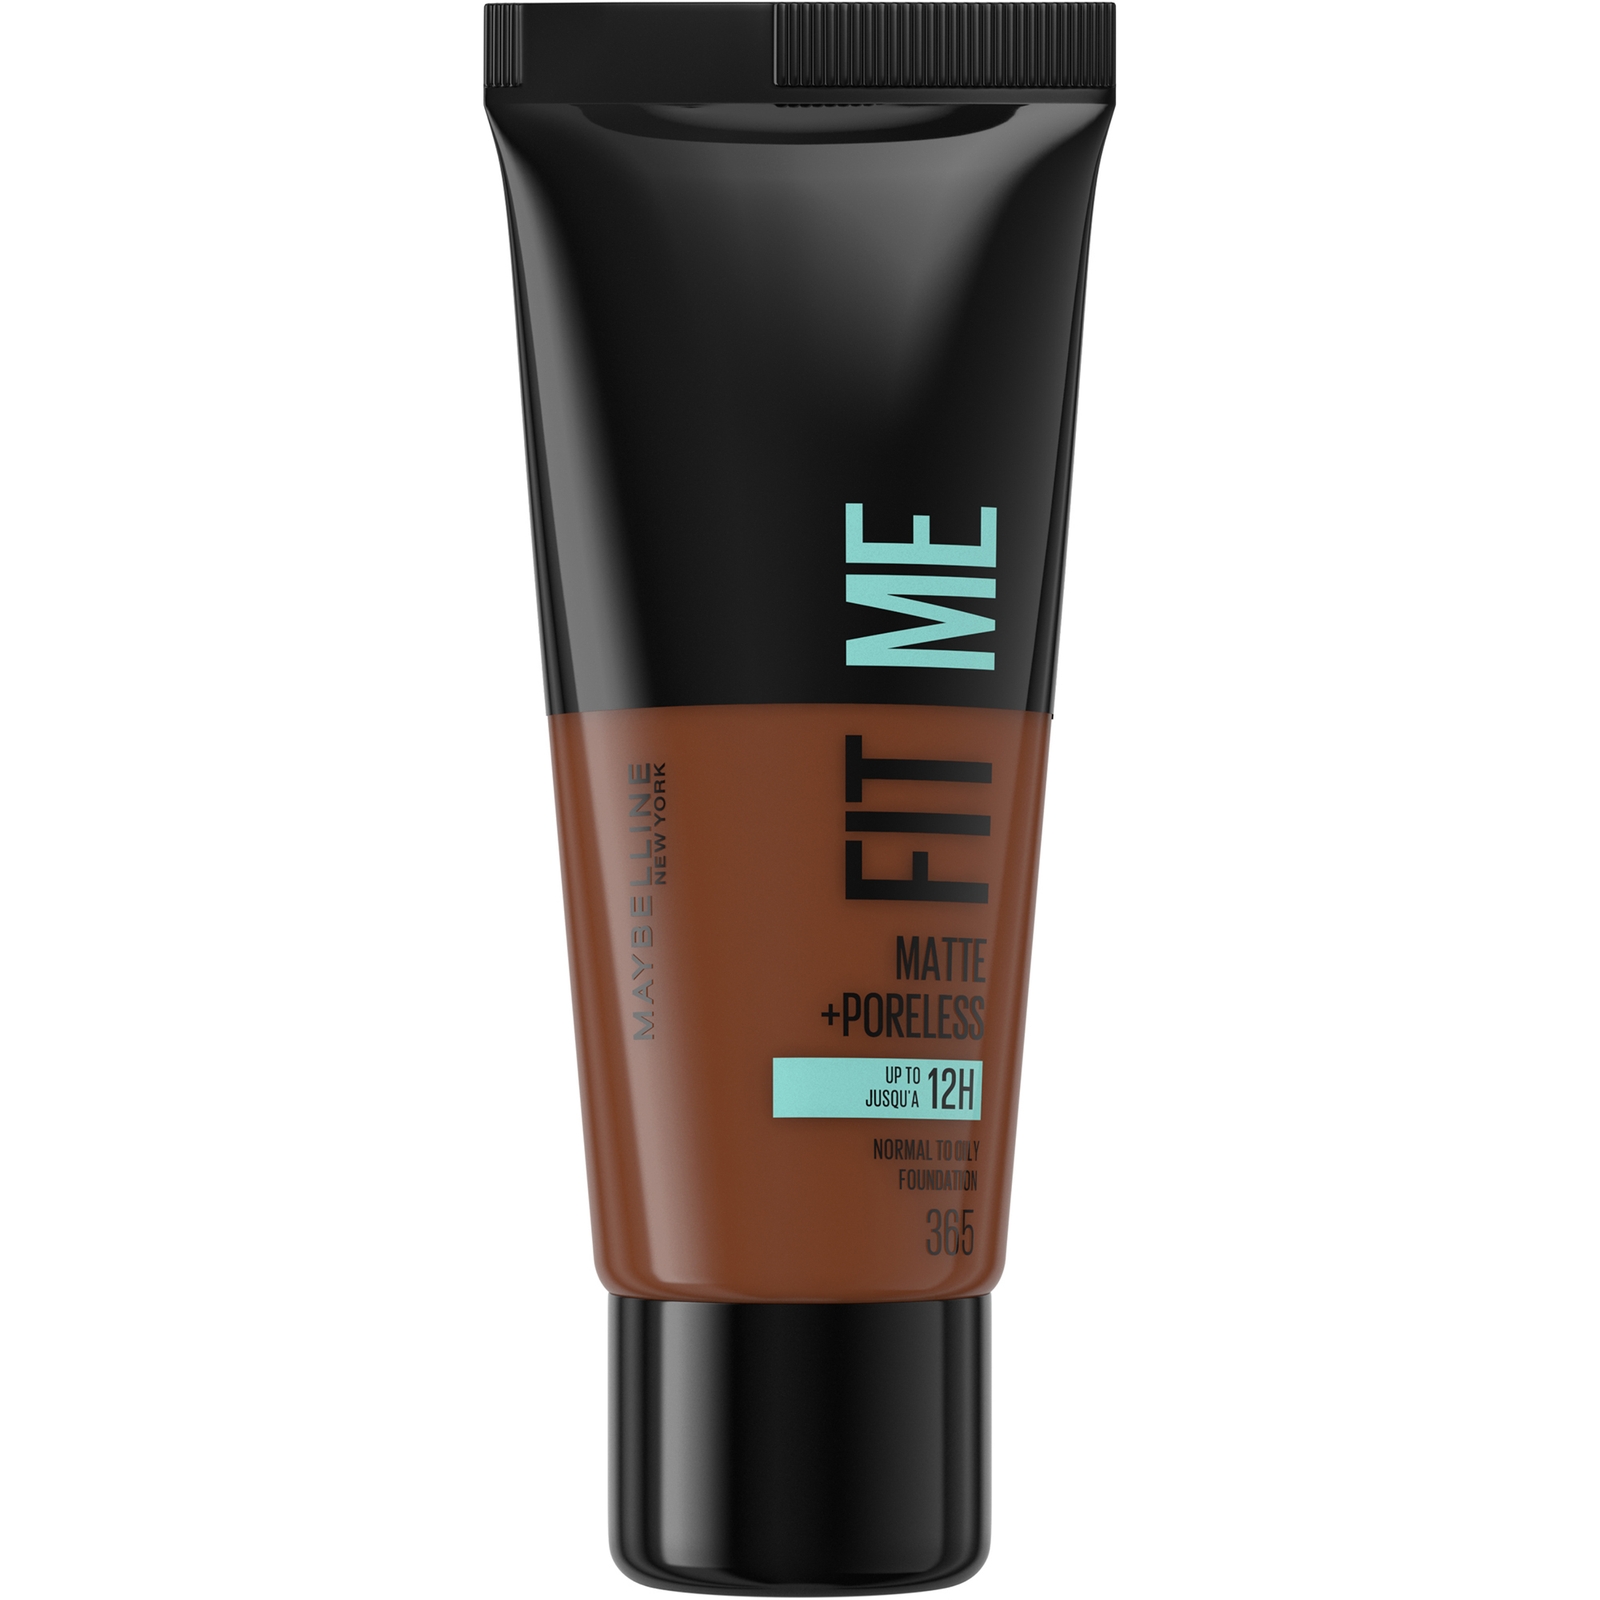 Maybelline Fit Me! Matte and Poreless Foundation 30ml (Various Shades) - 365 Espresso